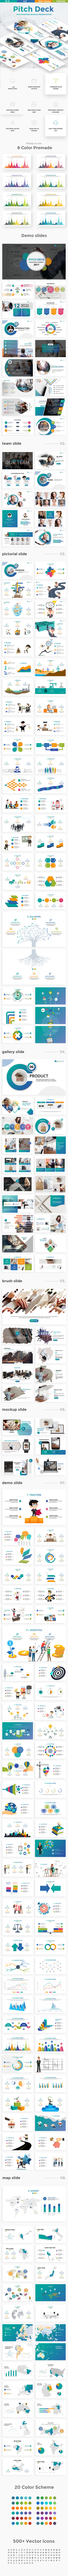 GraphicRiver Pitch Deck Multipurpose Powerpoint Template 20851371